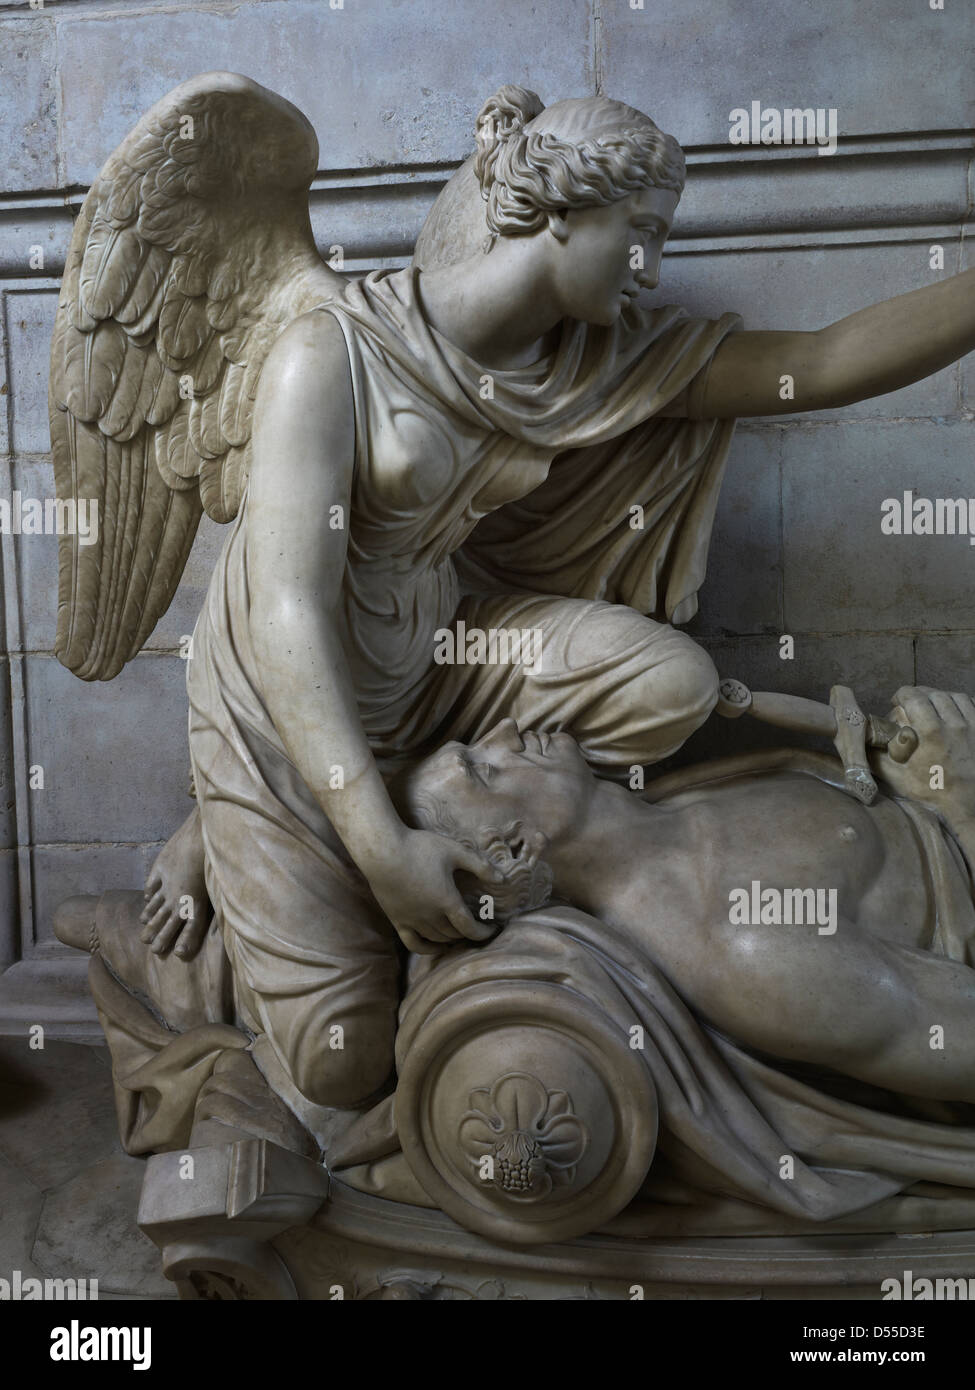 St. Pauls Cathedral, London. Collingwood Denkmal detail Stockfoto